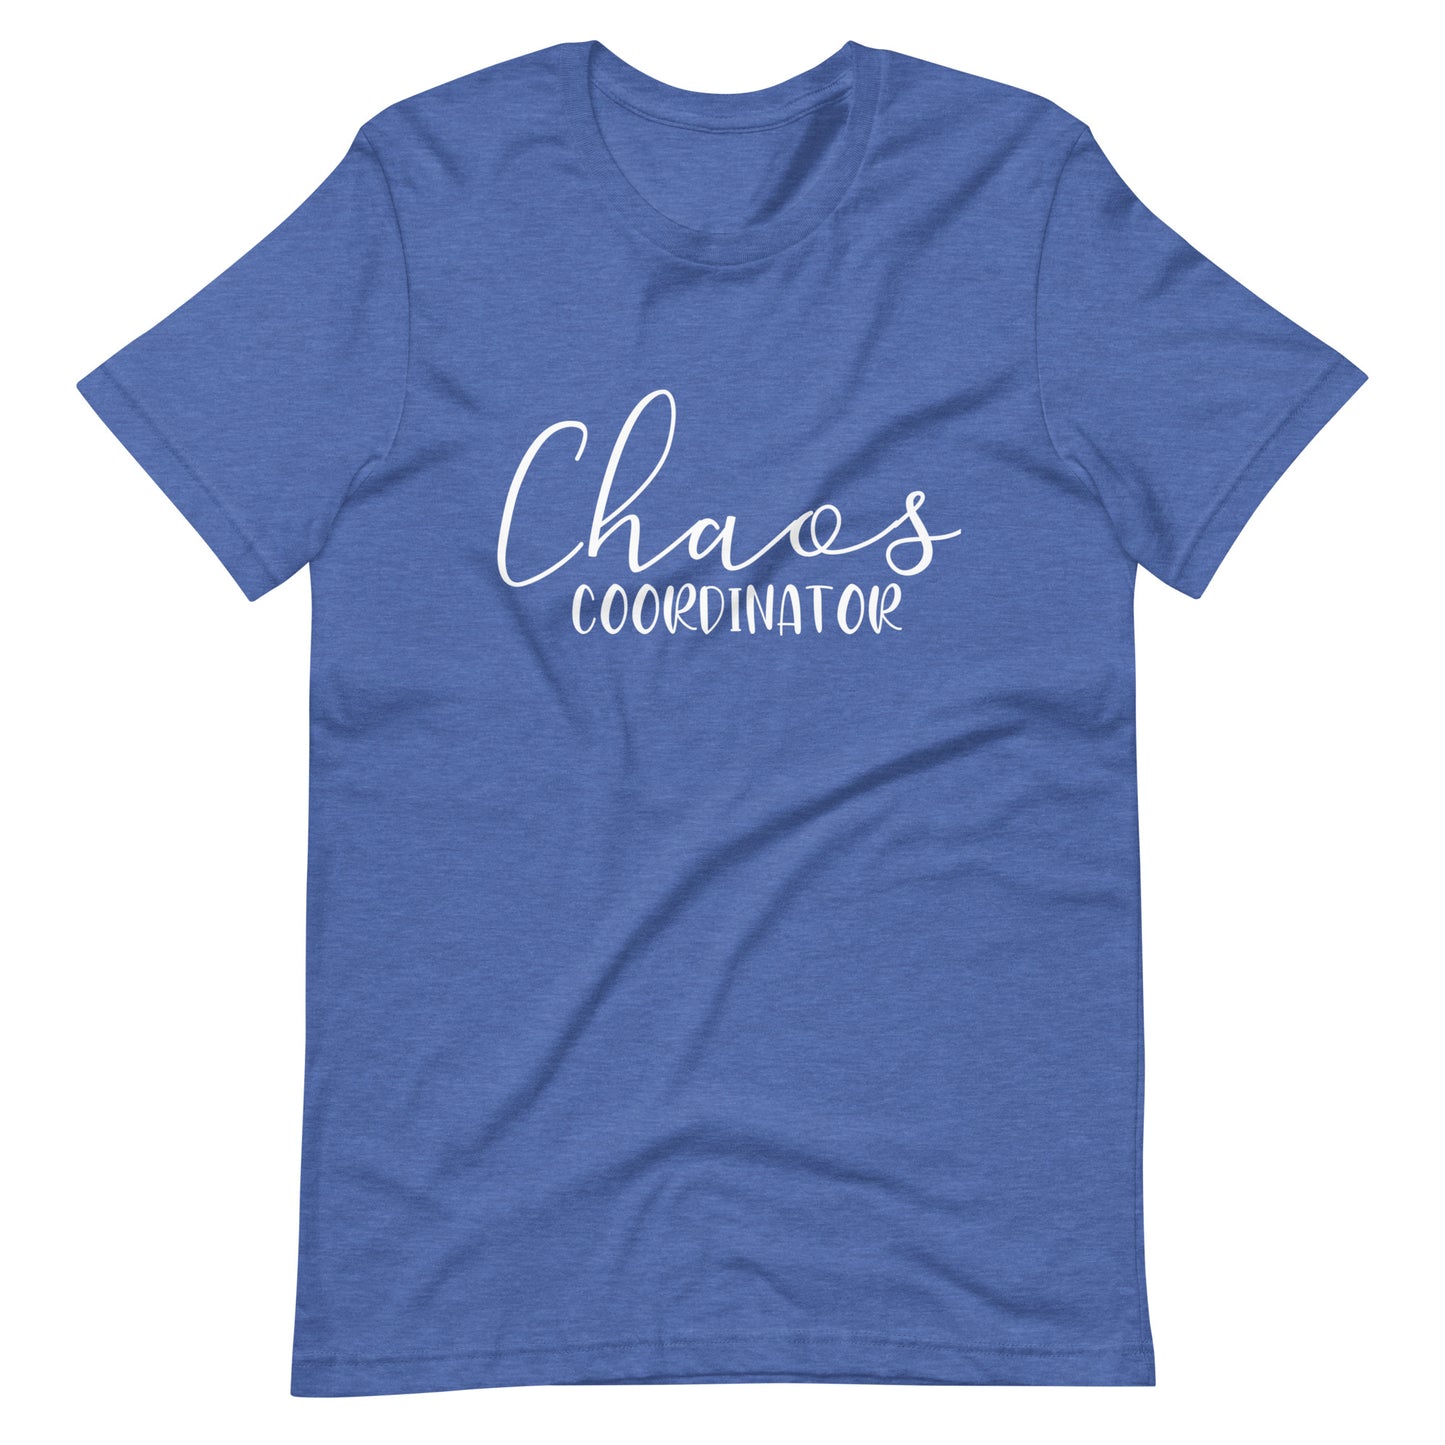 Chaos Coordinator T-shirt in heather true royal with white lettering